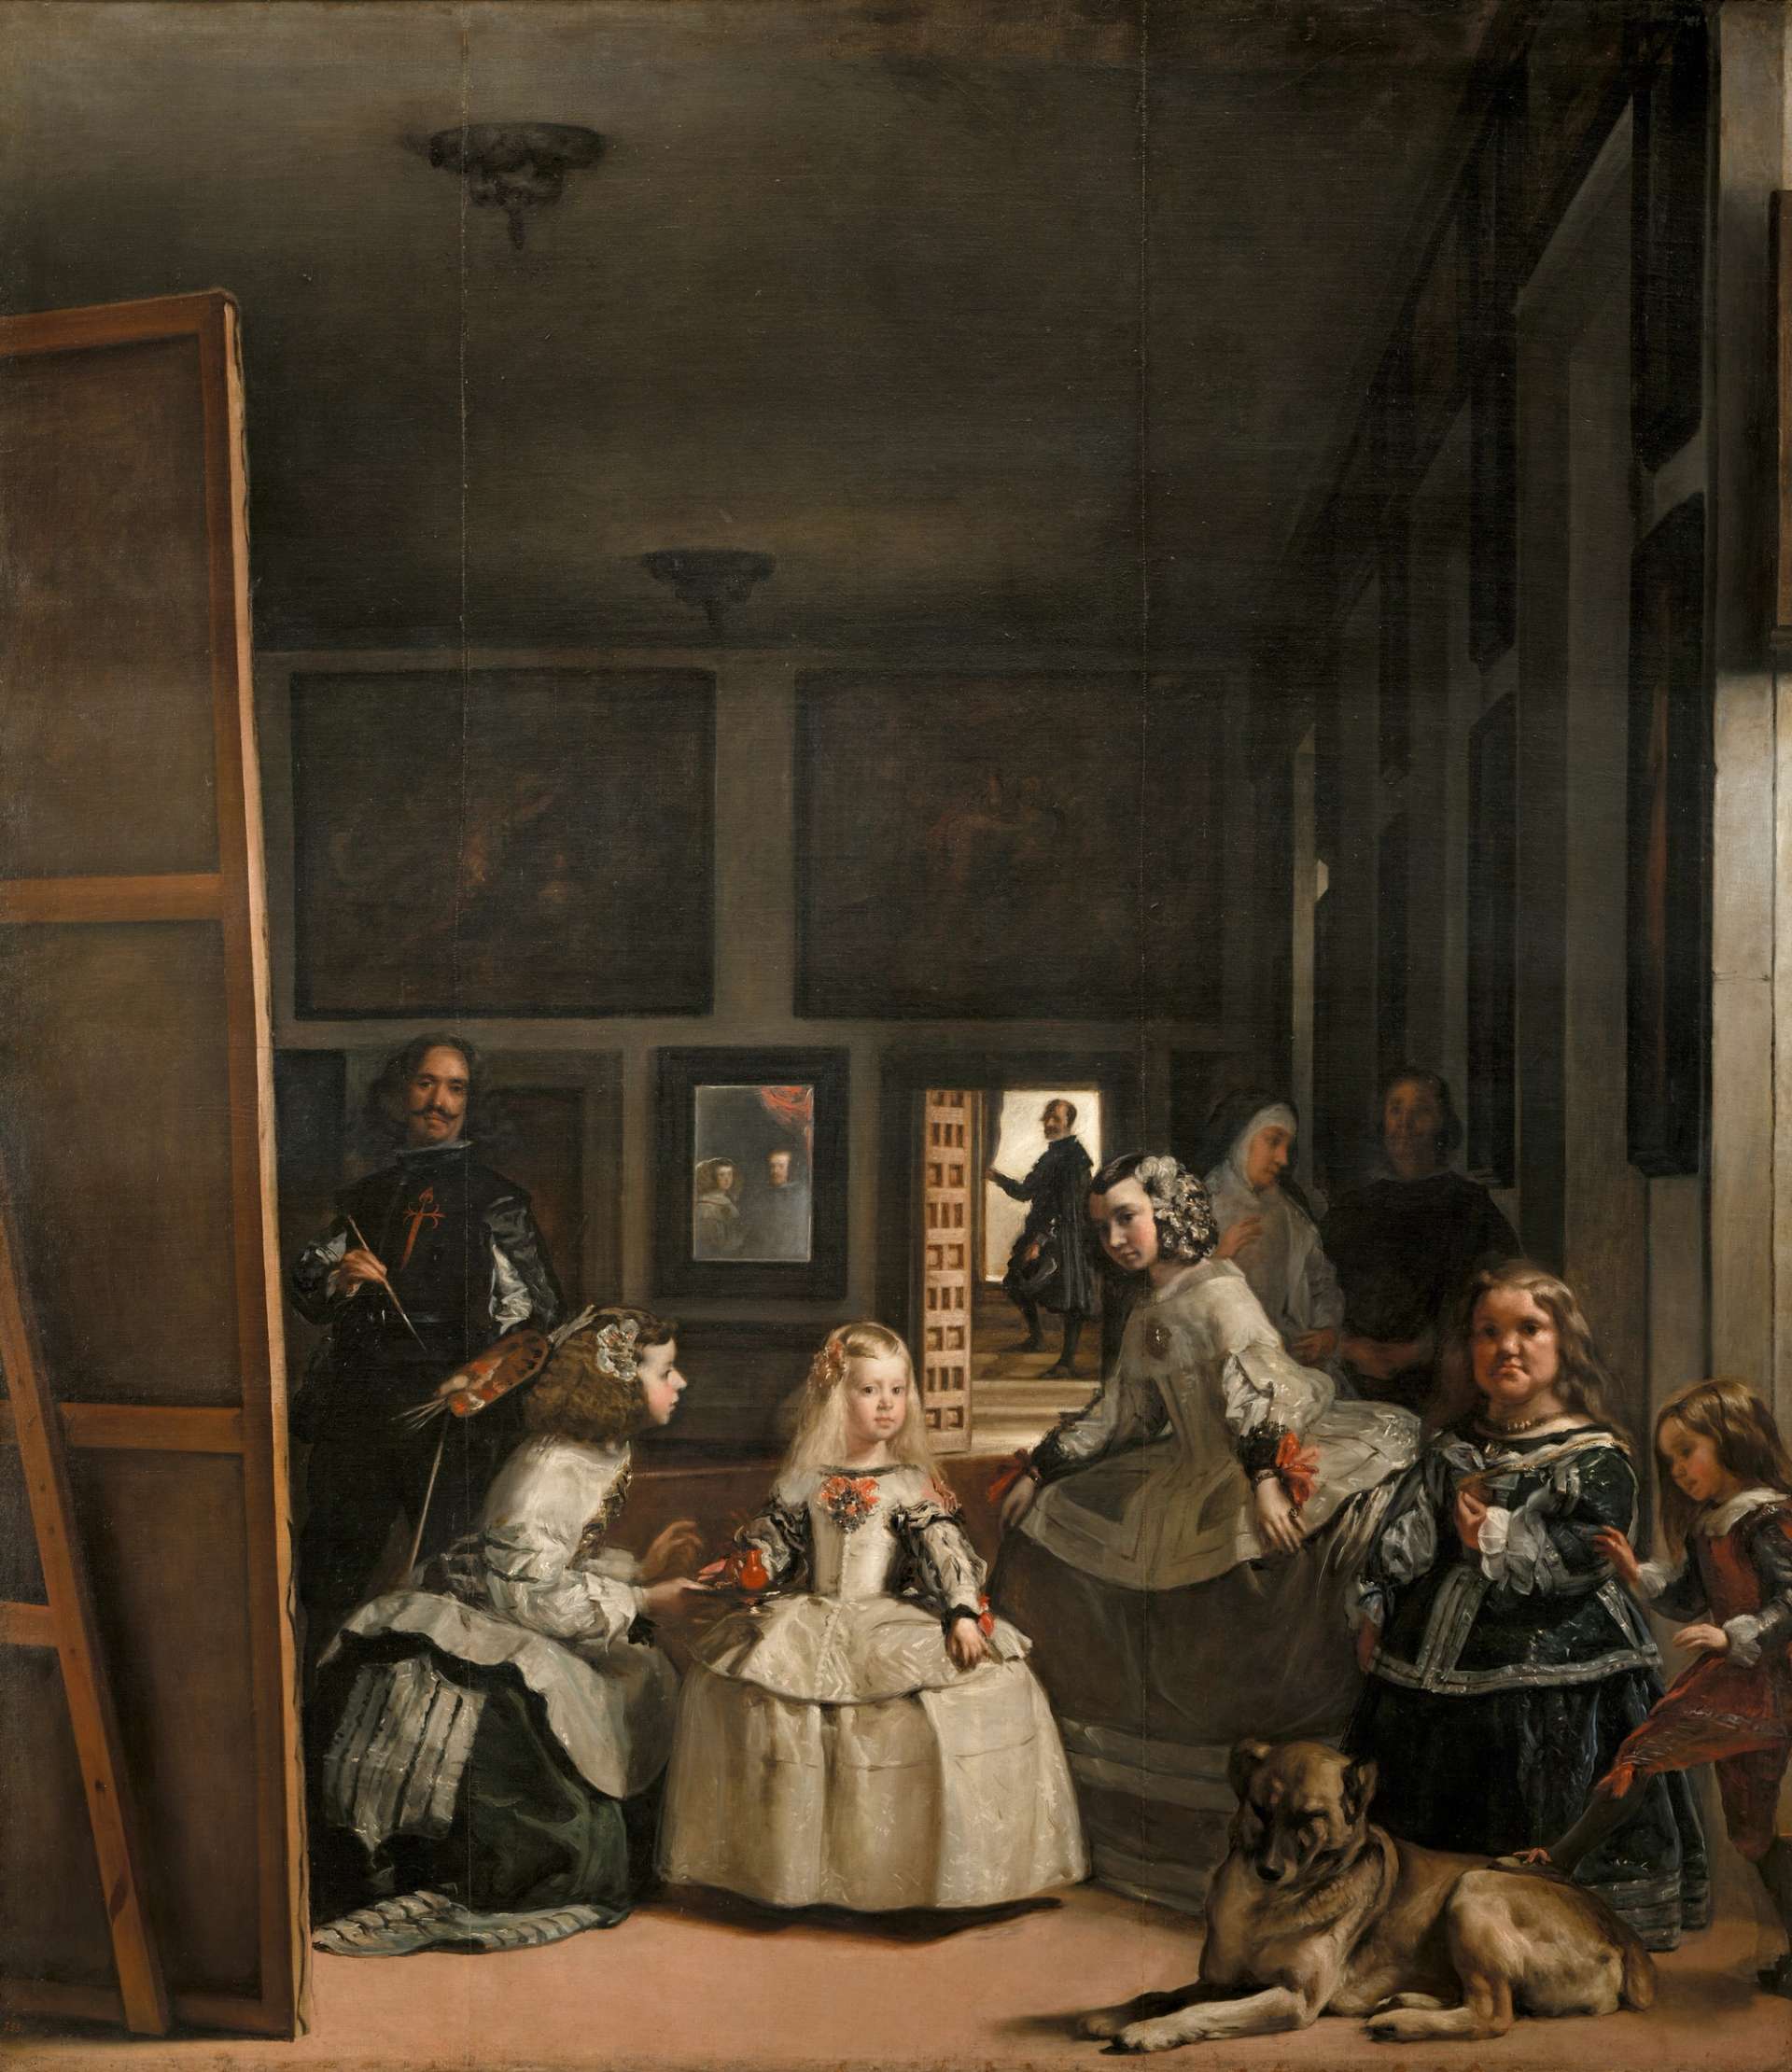 A painting titled "Las Meninas" by Diego Velázquez, depicting a group of figures in the royal court of King Philip IV of Spain, including the artist himself and the young princess Margaret Theresa.